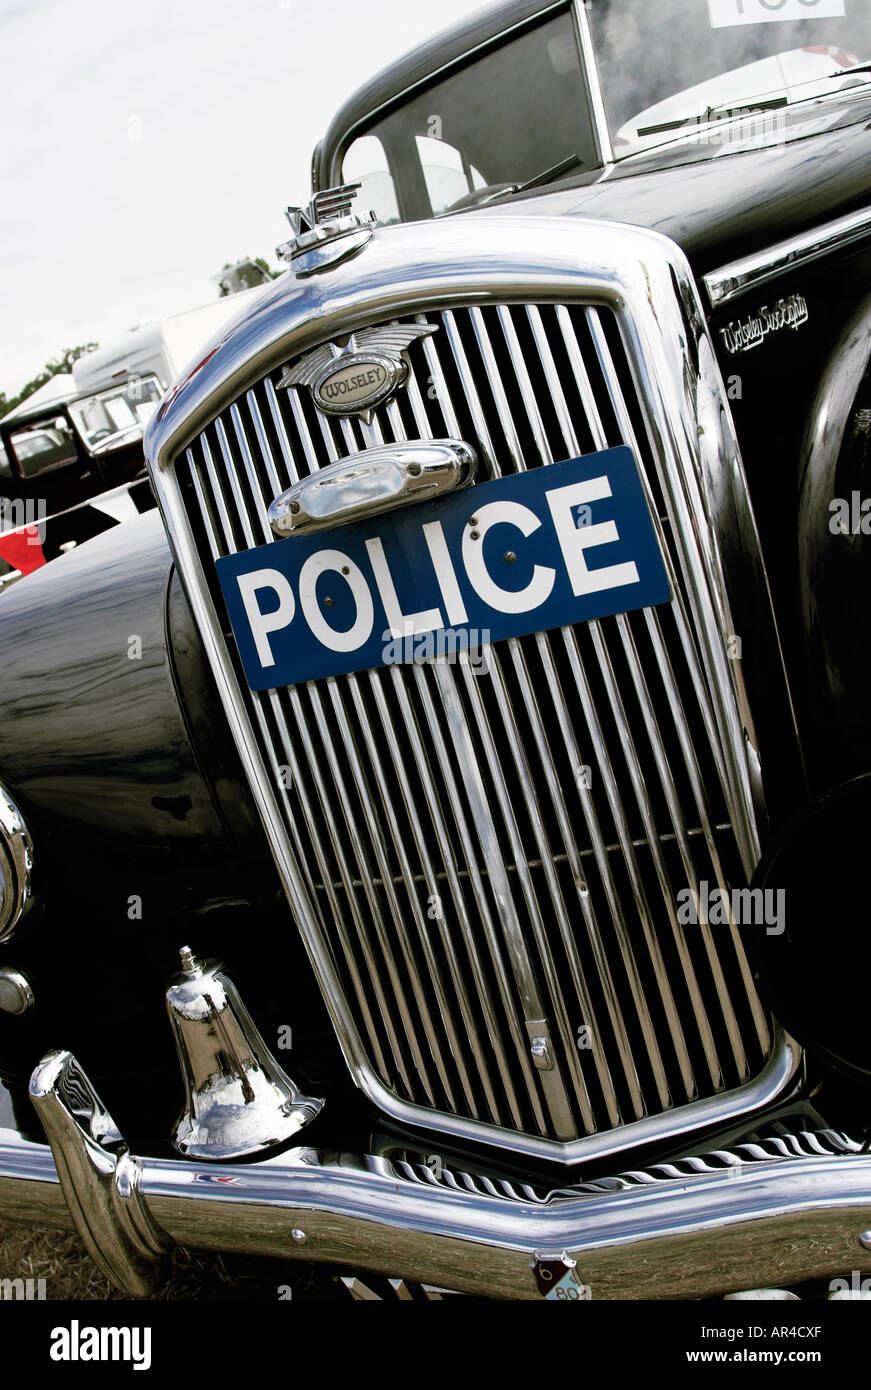 The front of a Wolesley six eighty police car showing the police badge and headlights Stock Photo